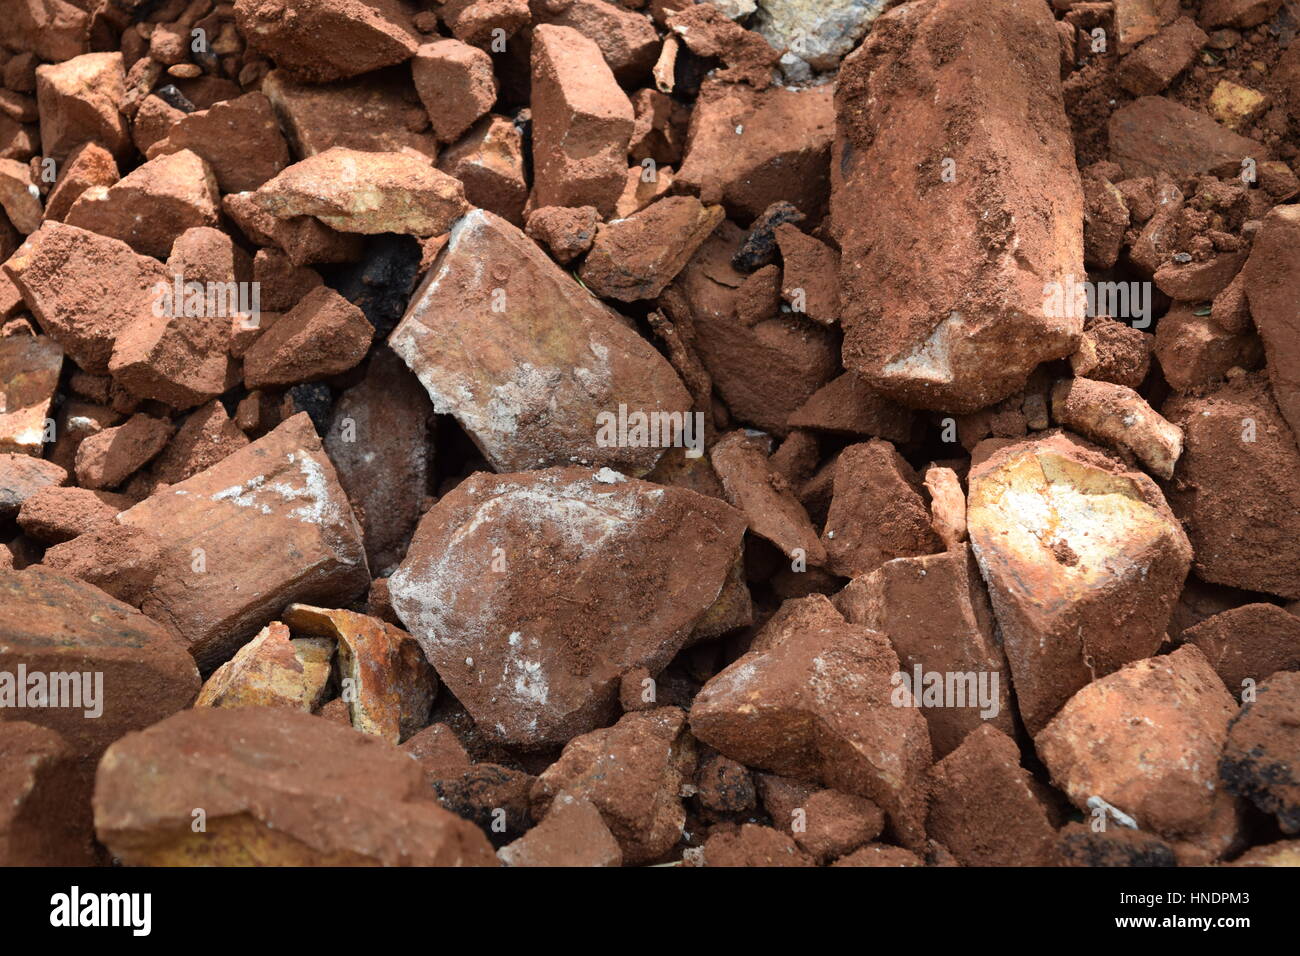 Rocks at a construction site Stock Photo